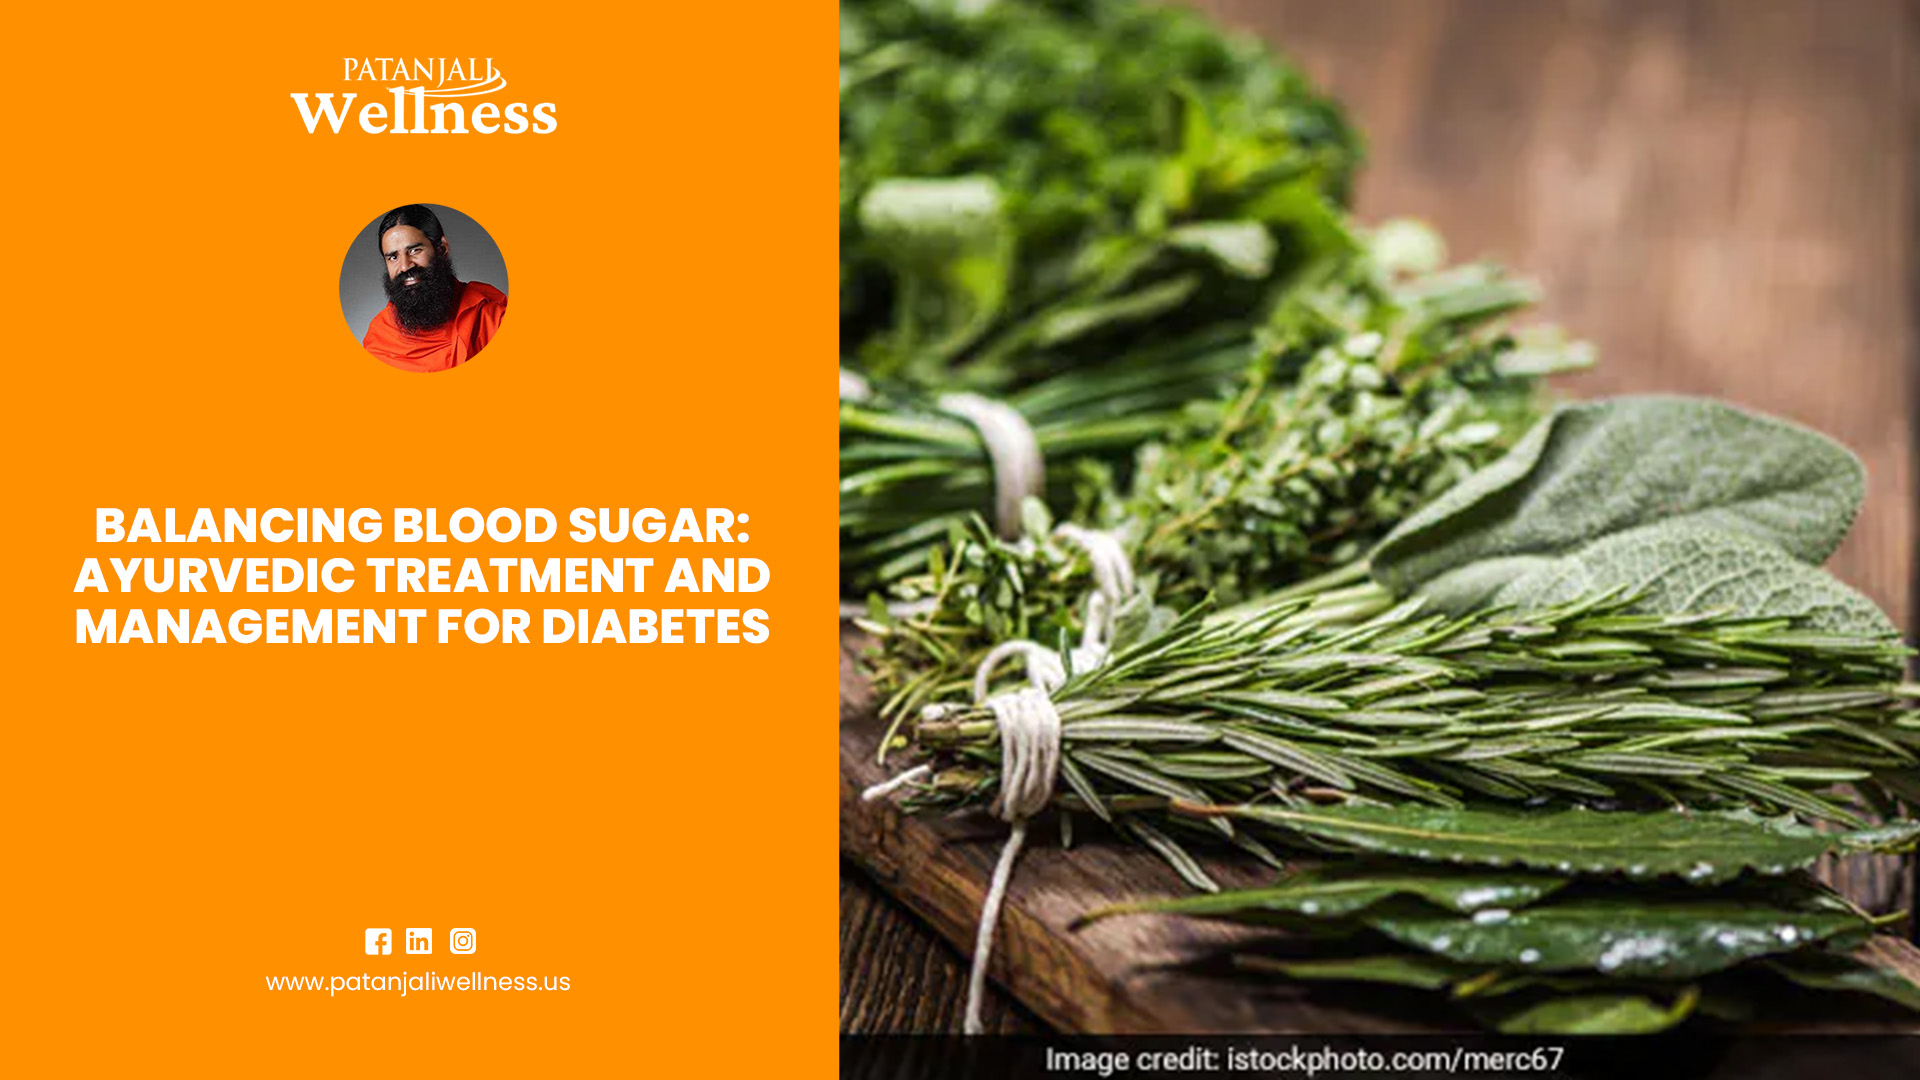 Ayurvedic Treatment and Management for Diabetes